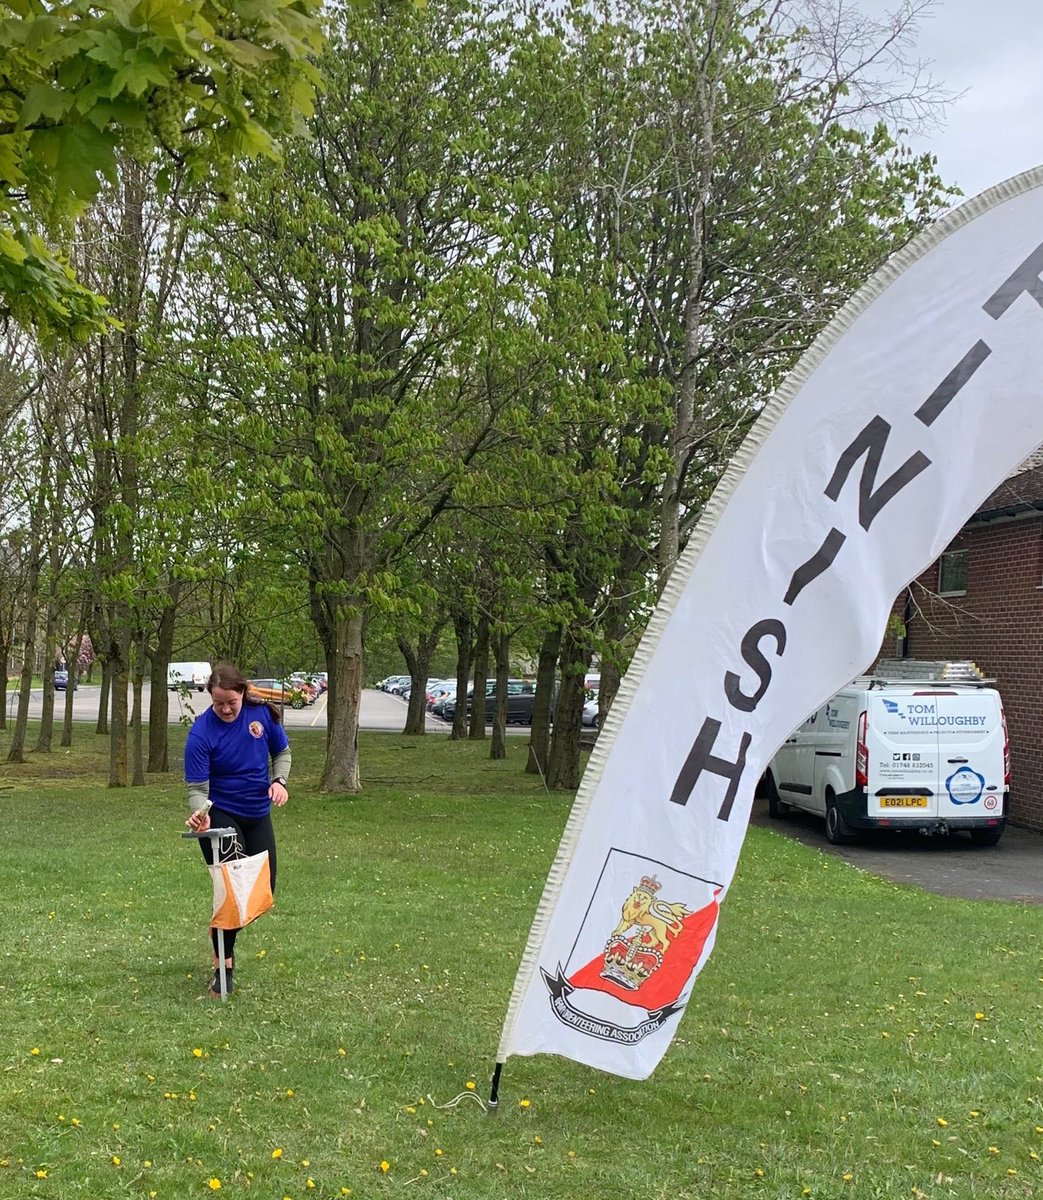 4 personnel from @DMS_DMGNorth attended the Harris Orienteering event today, hosted by MLN-O. All enjoyed it, with three new comers to the sport. Looking forward to future events in the north and @aorienteering.